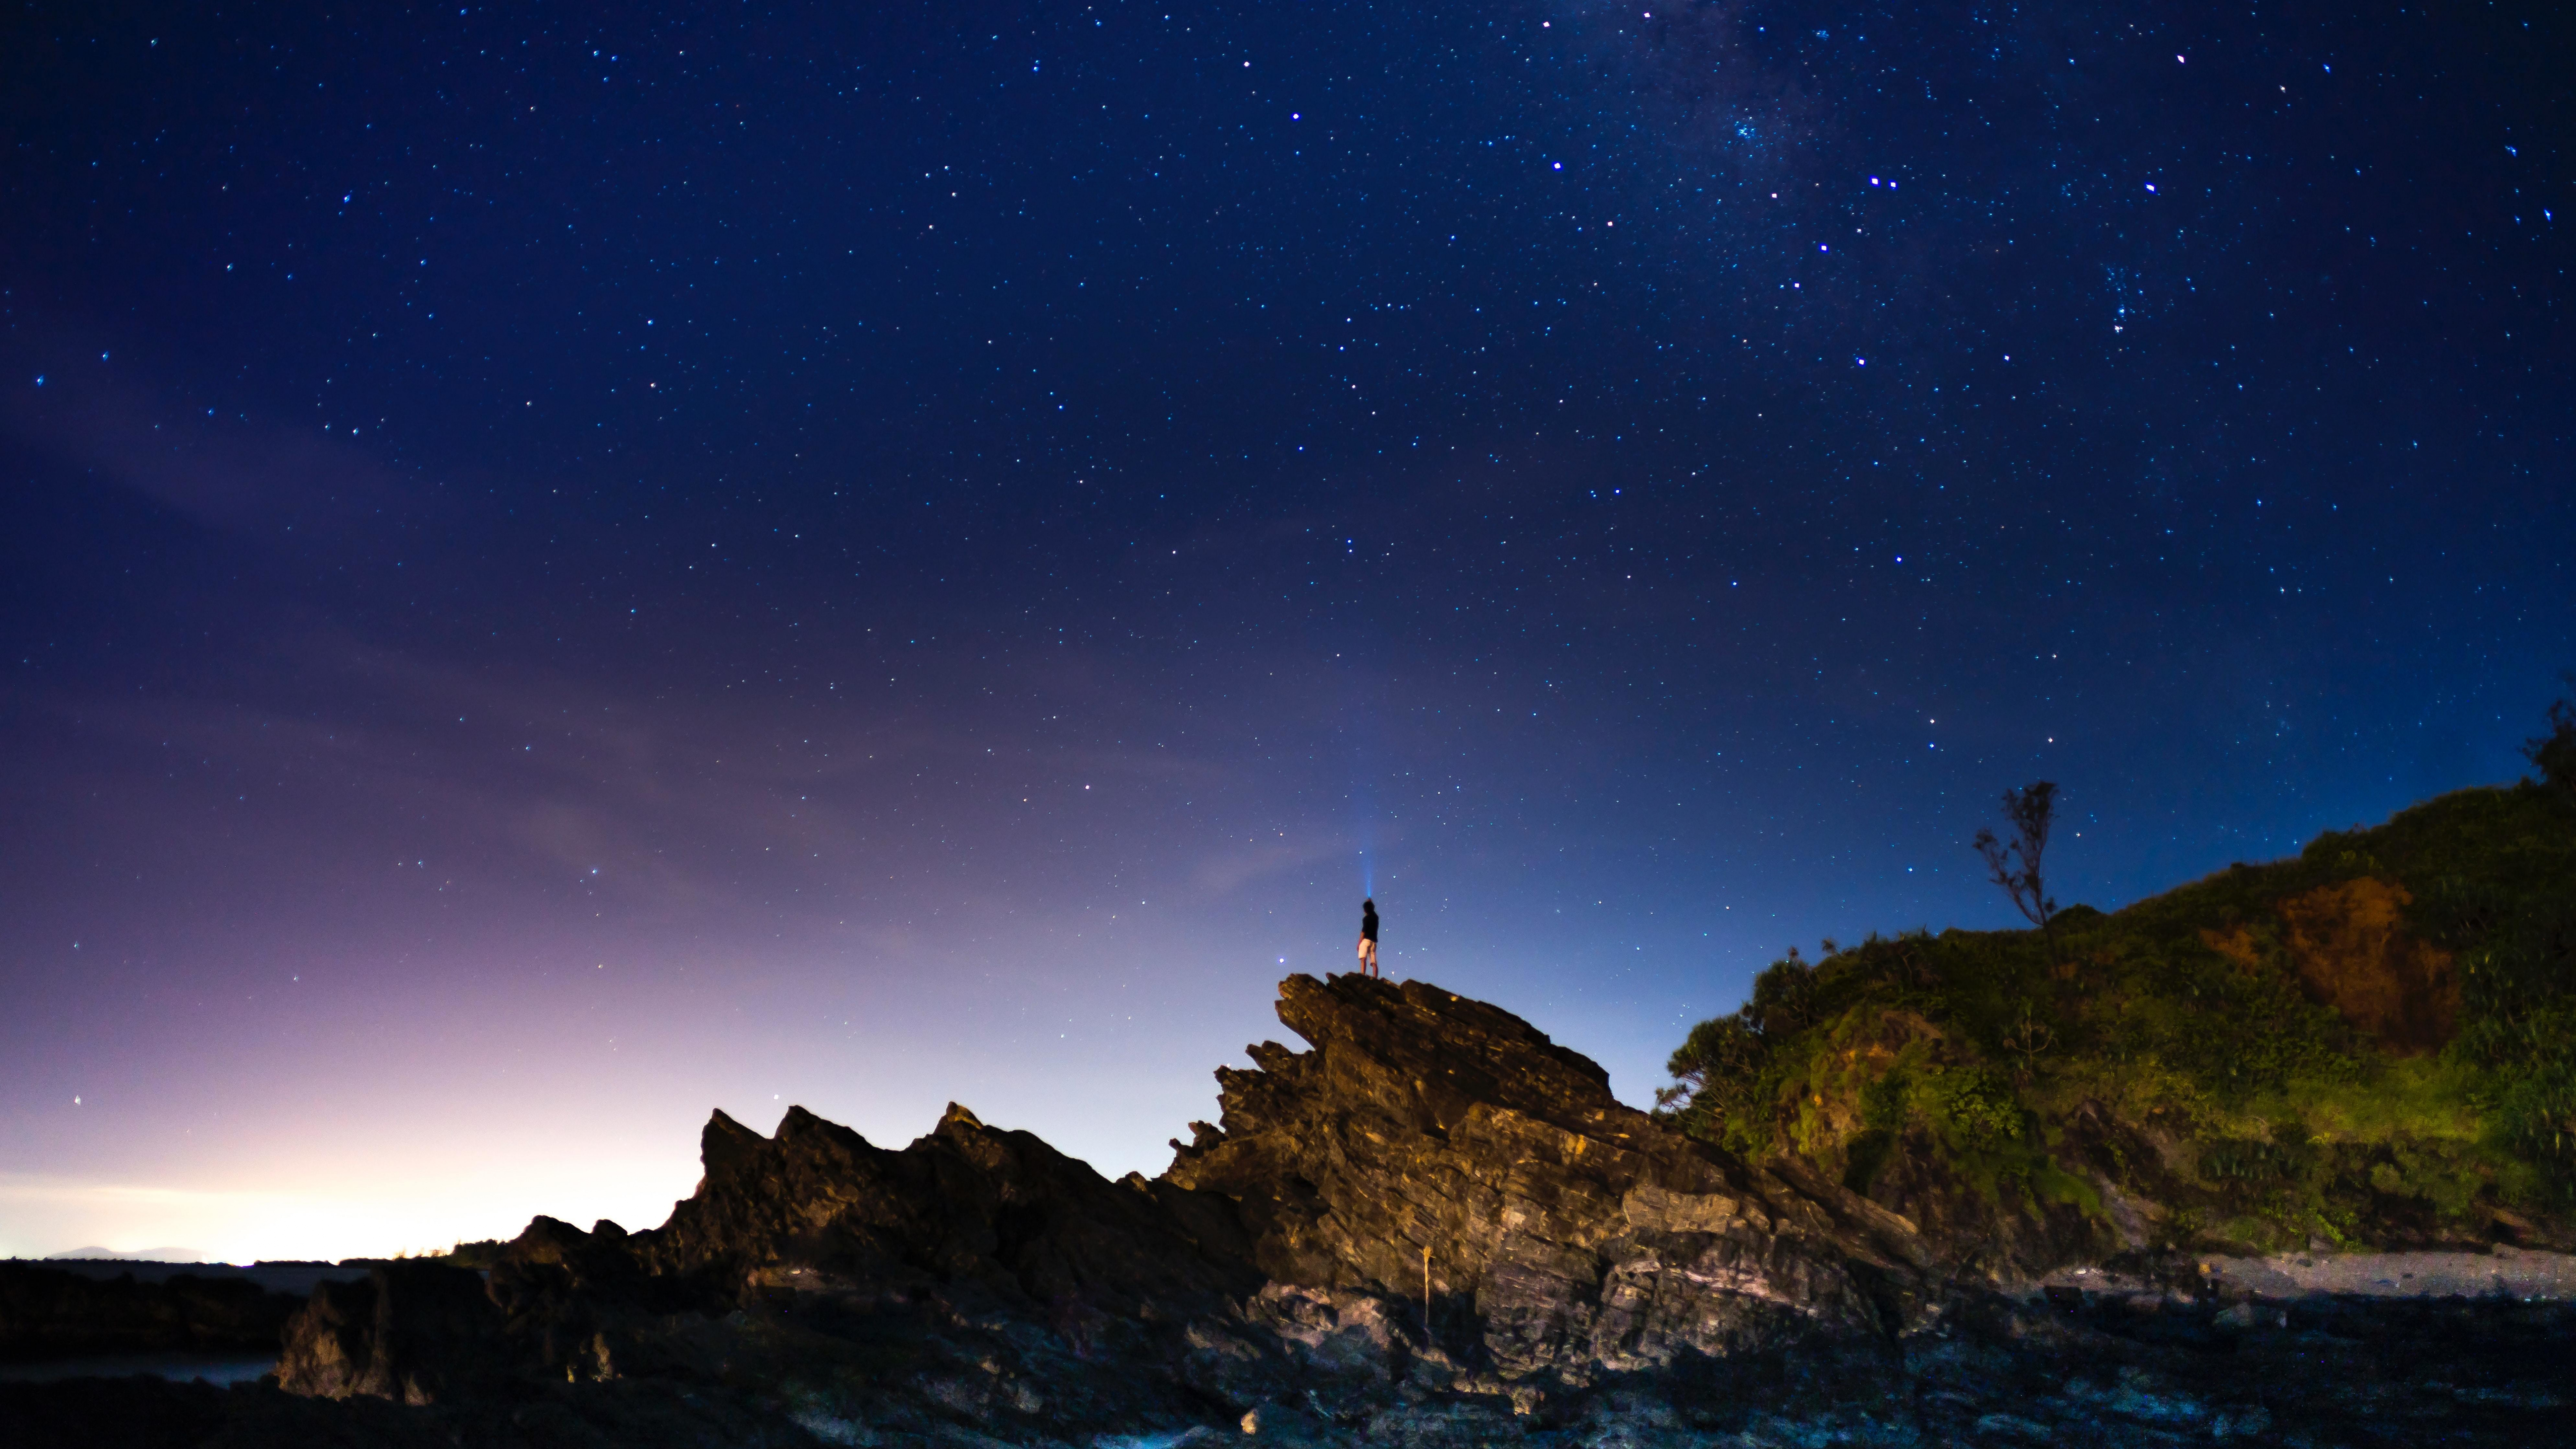 Download wallpaper 7680x4320 coast, man, starry and clean sky 8k wallpaper, 7680x4320  8k background, 21063